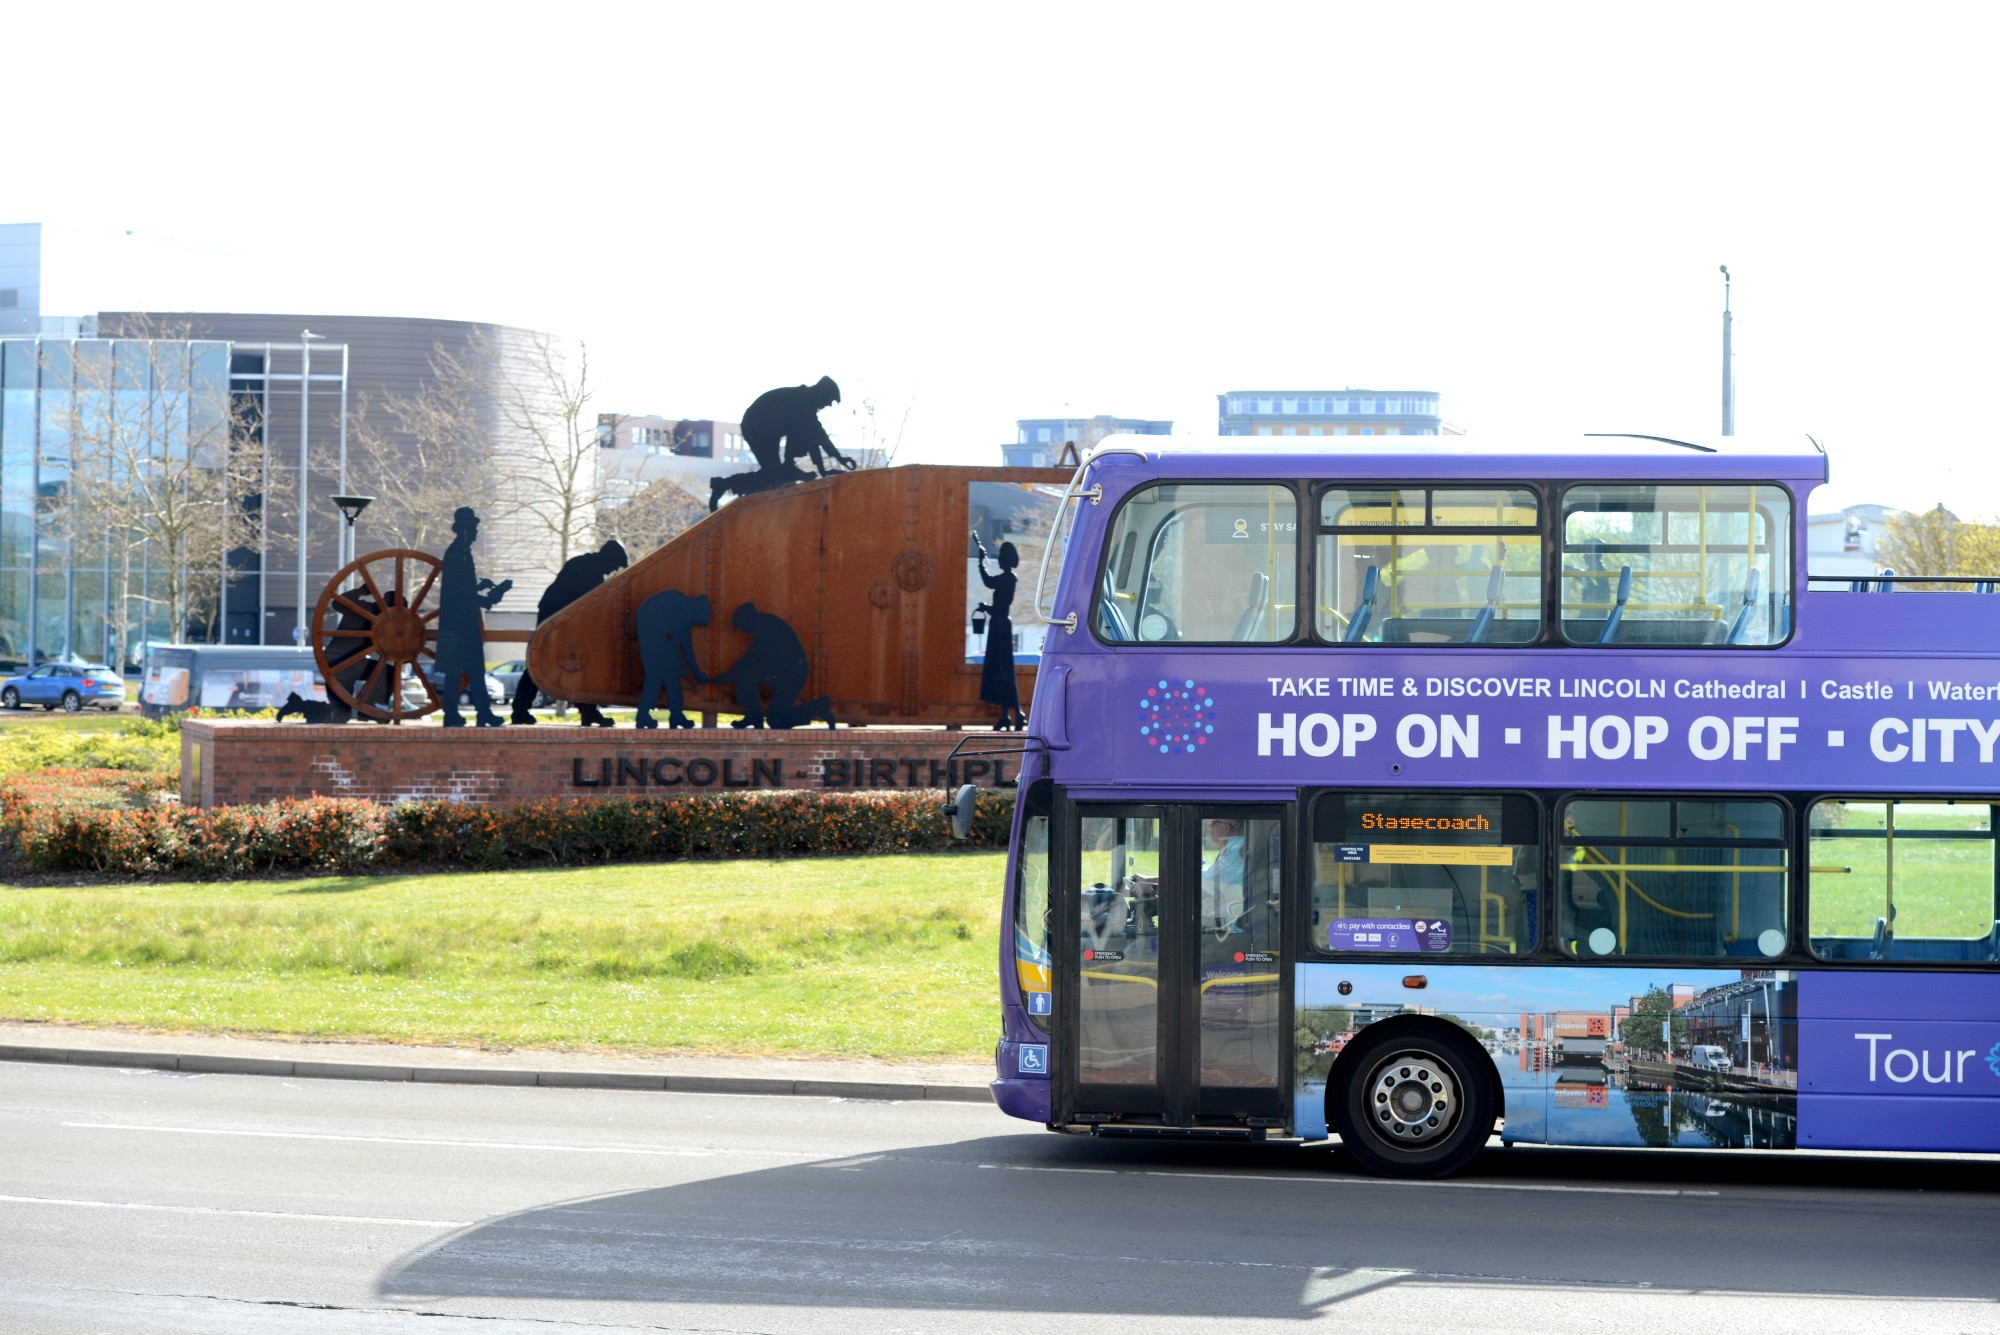 Celebrate the launch of the Tour Bus with FREE tickets over Discover Lincolnshire Weekend!